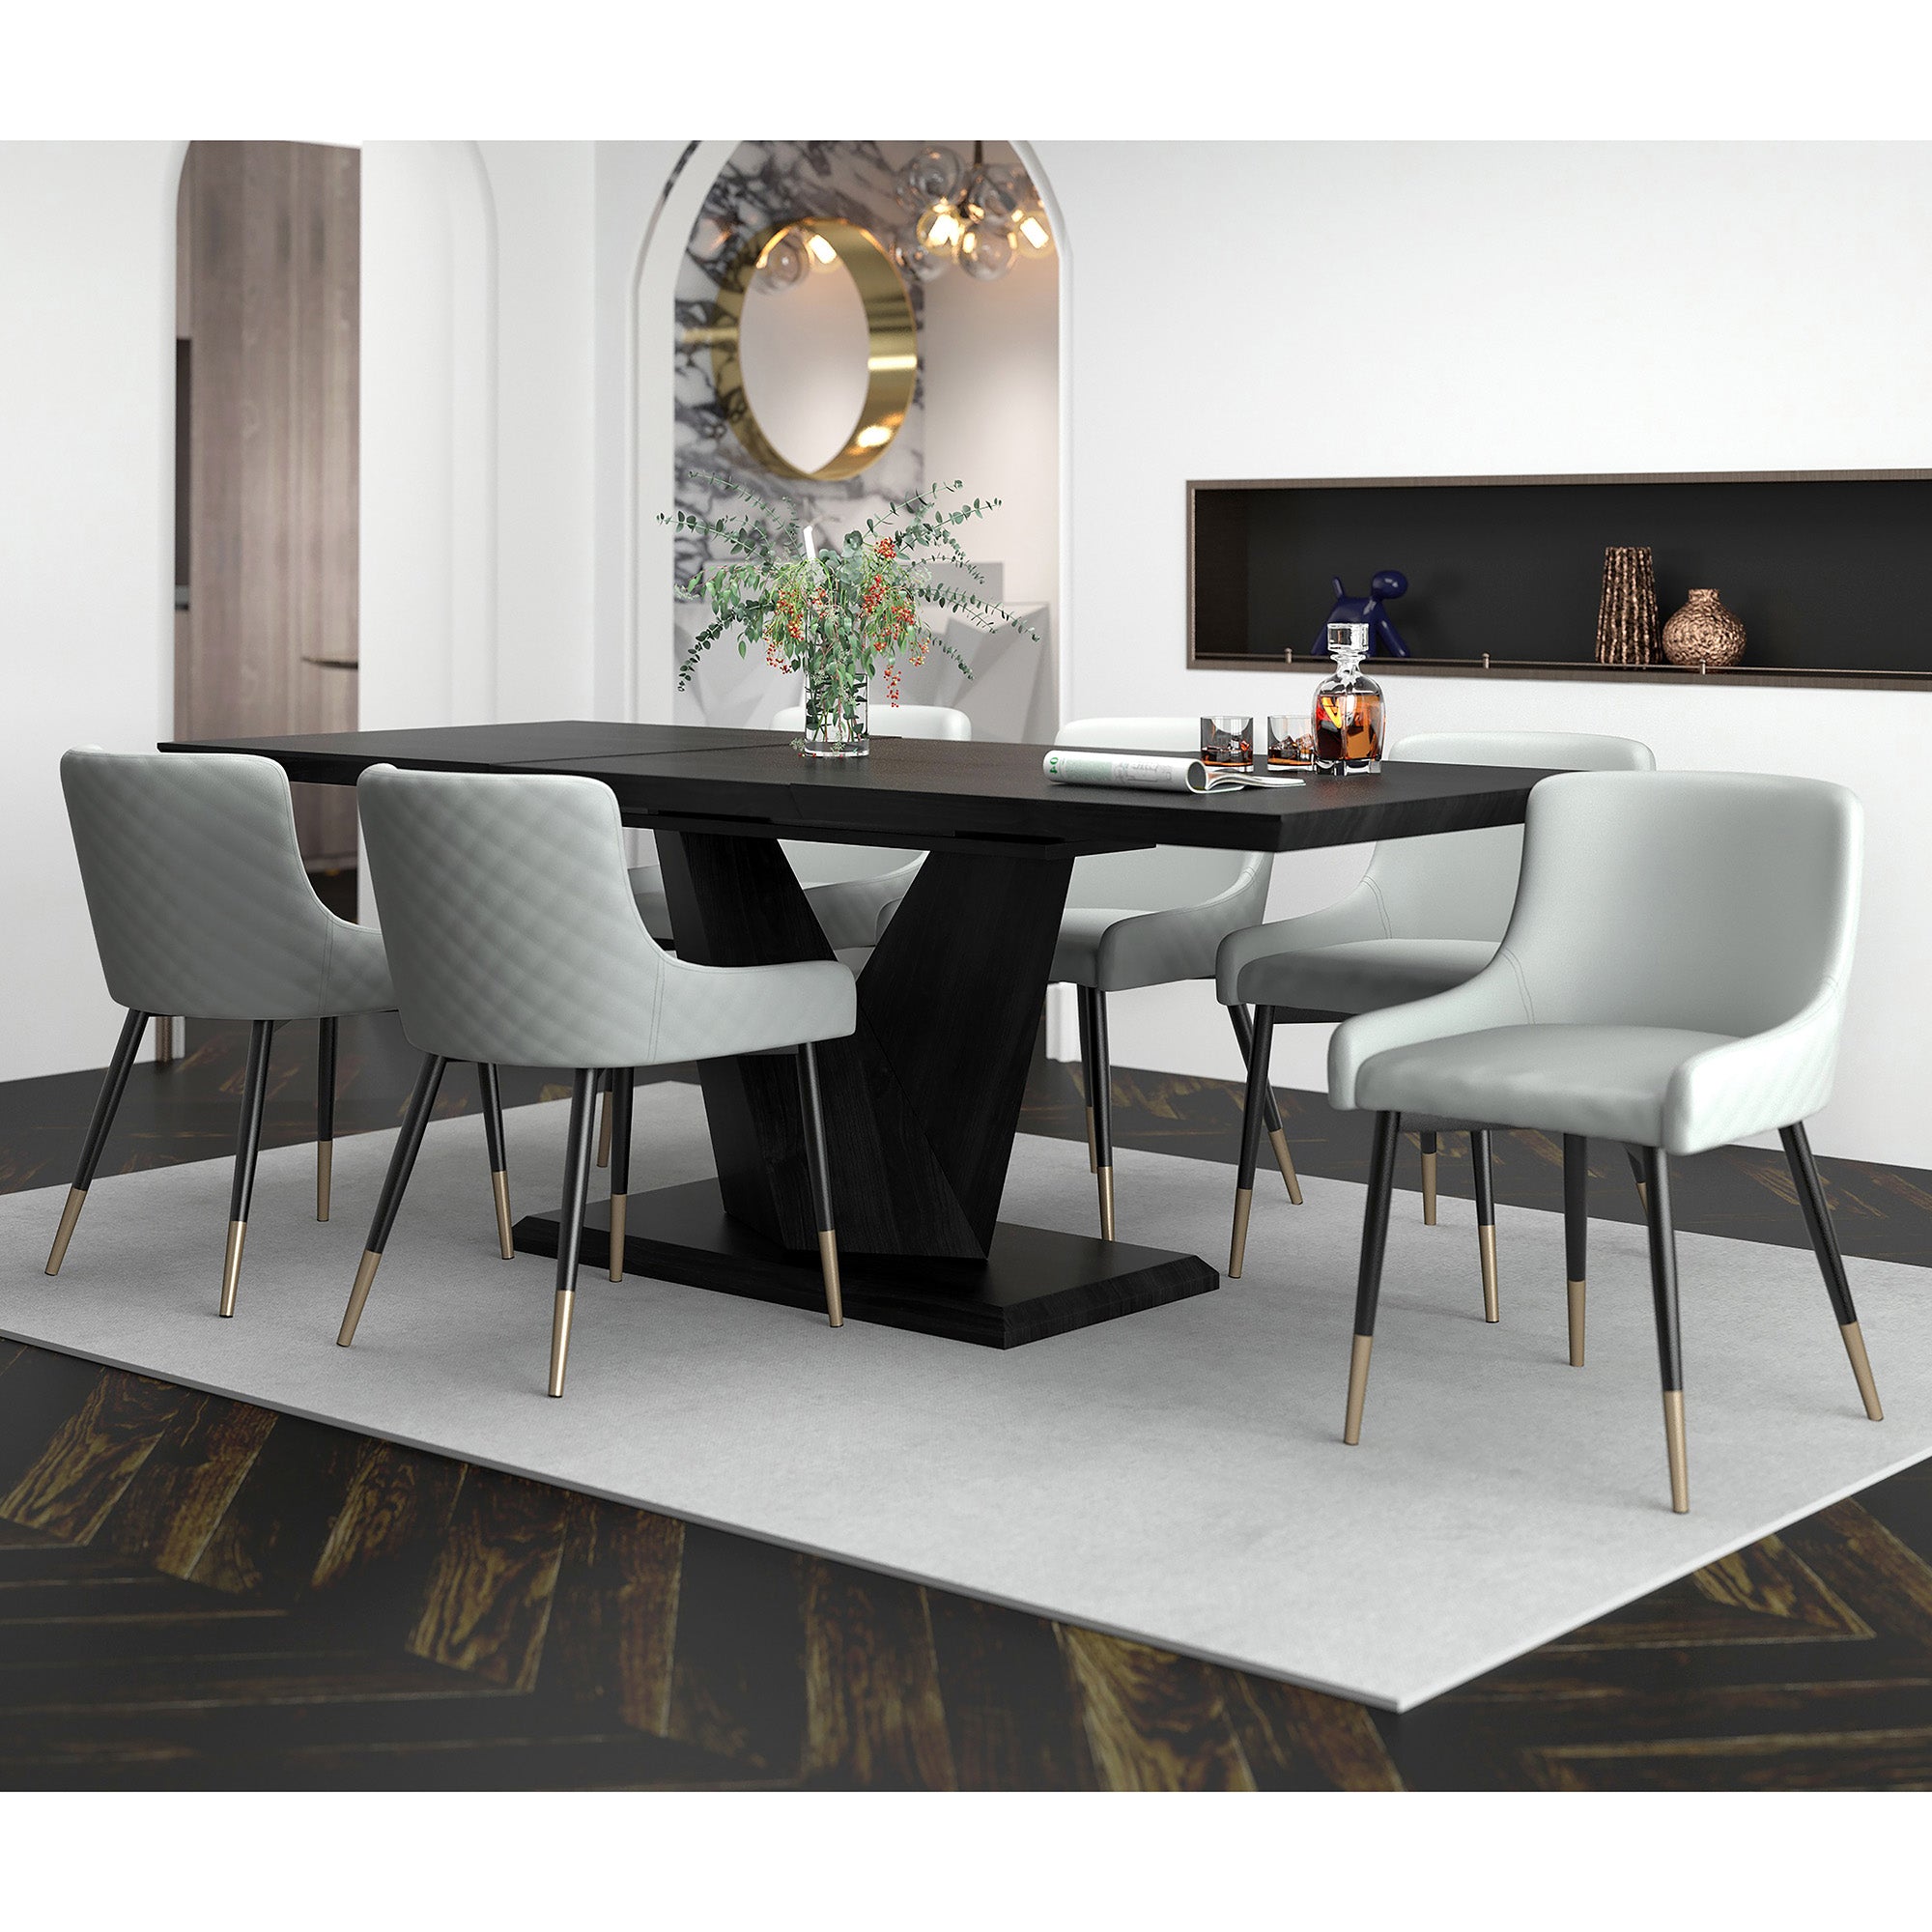 ECLIPSE EXTENSION DINING TABLE BLACK / XANDER LIGHT GREY CHAIRS -7PC DINING SET